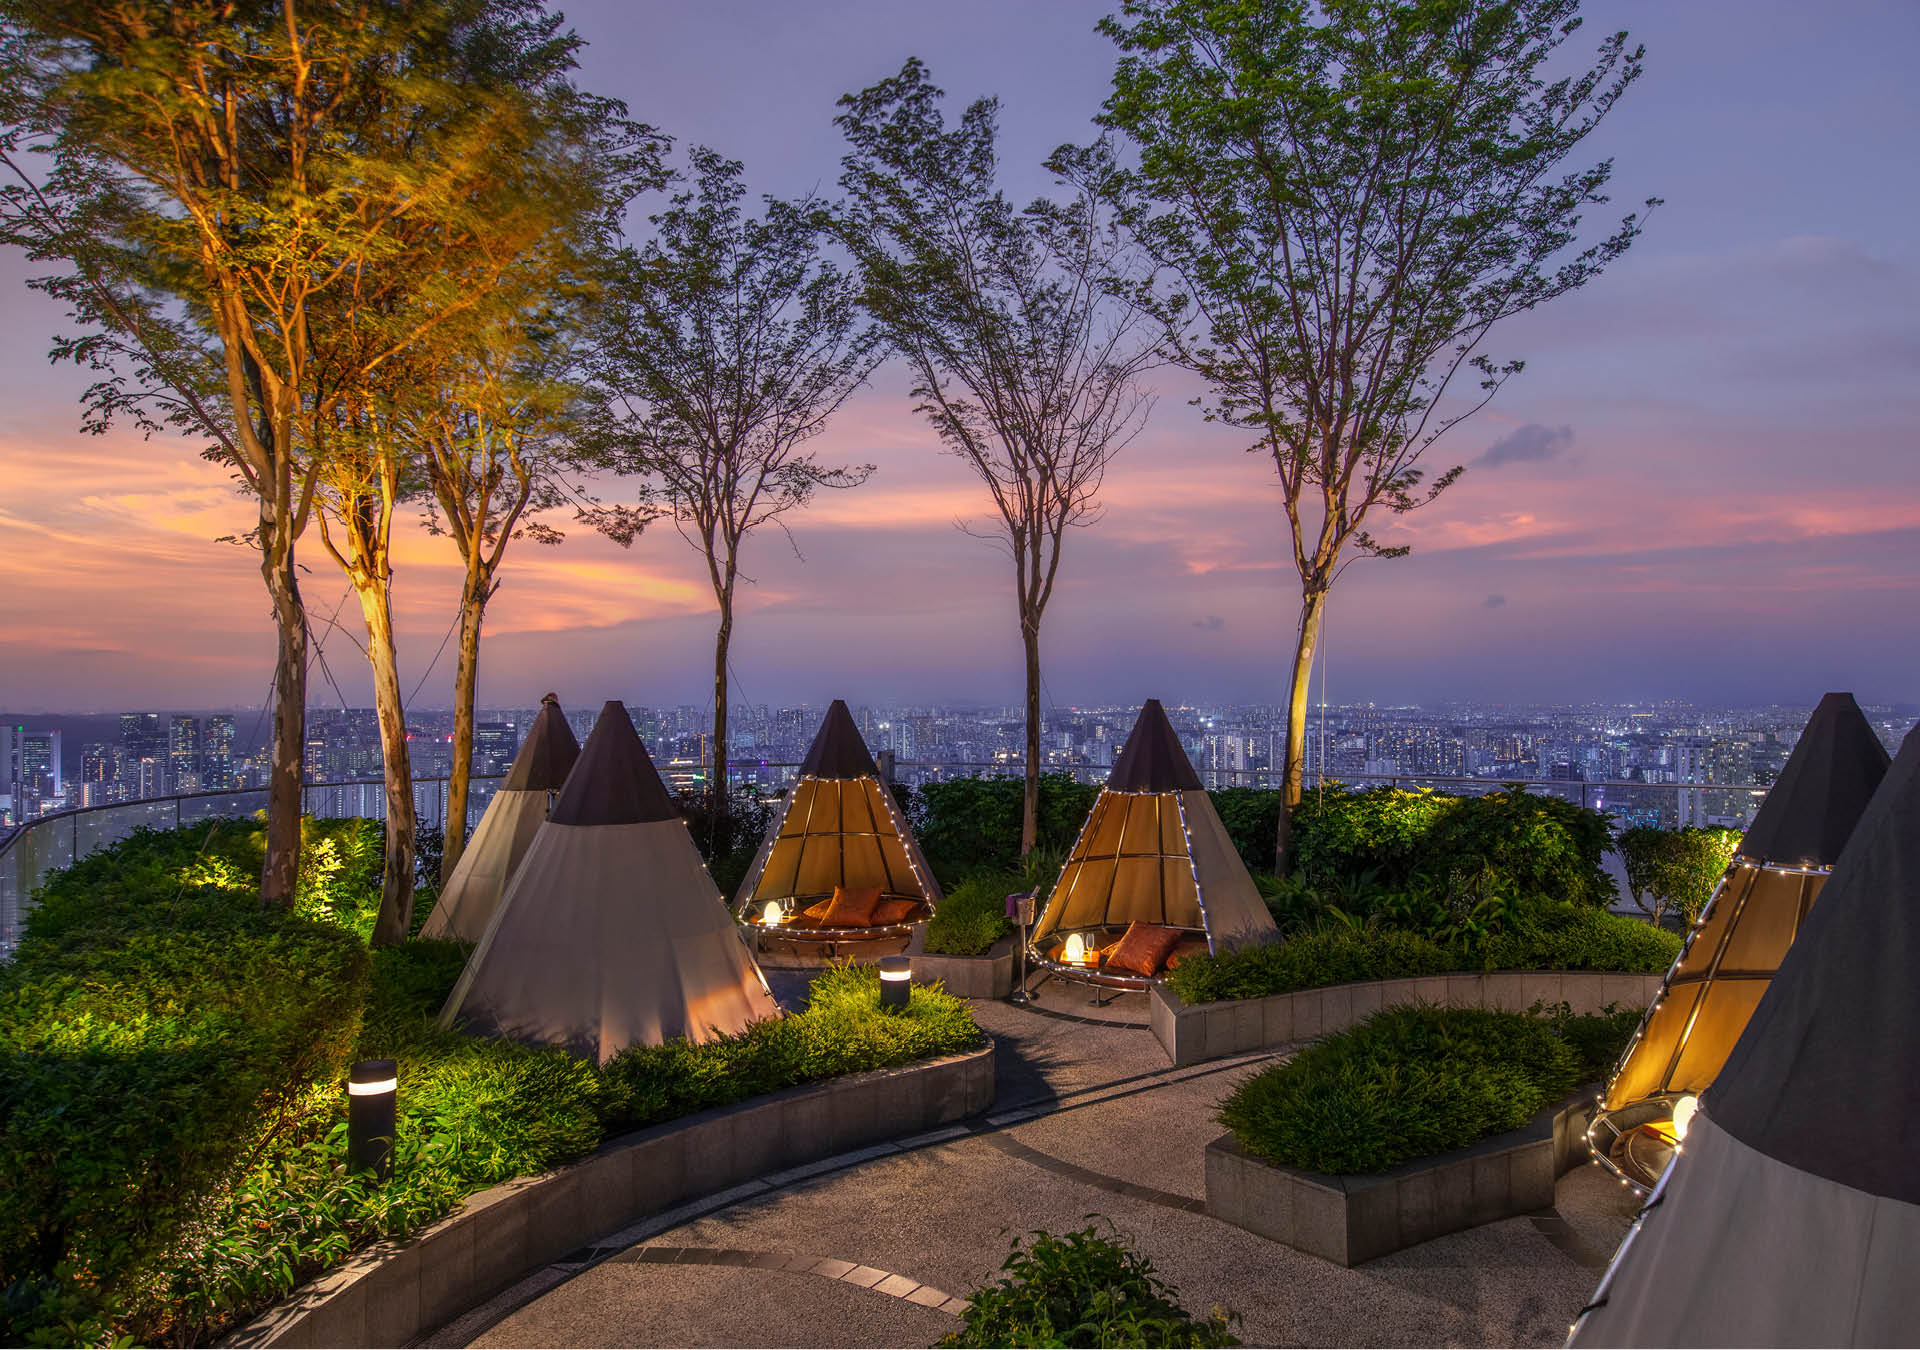 Tipi huts outside Andaz Singapore interspersed with trees, and a view of the city in the evening in the background.